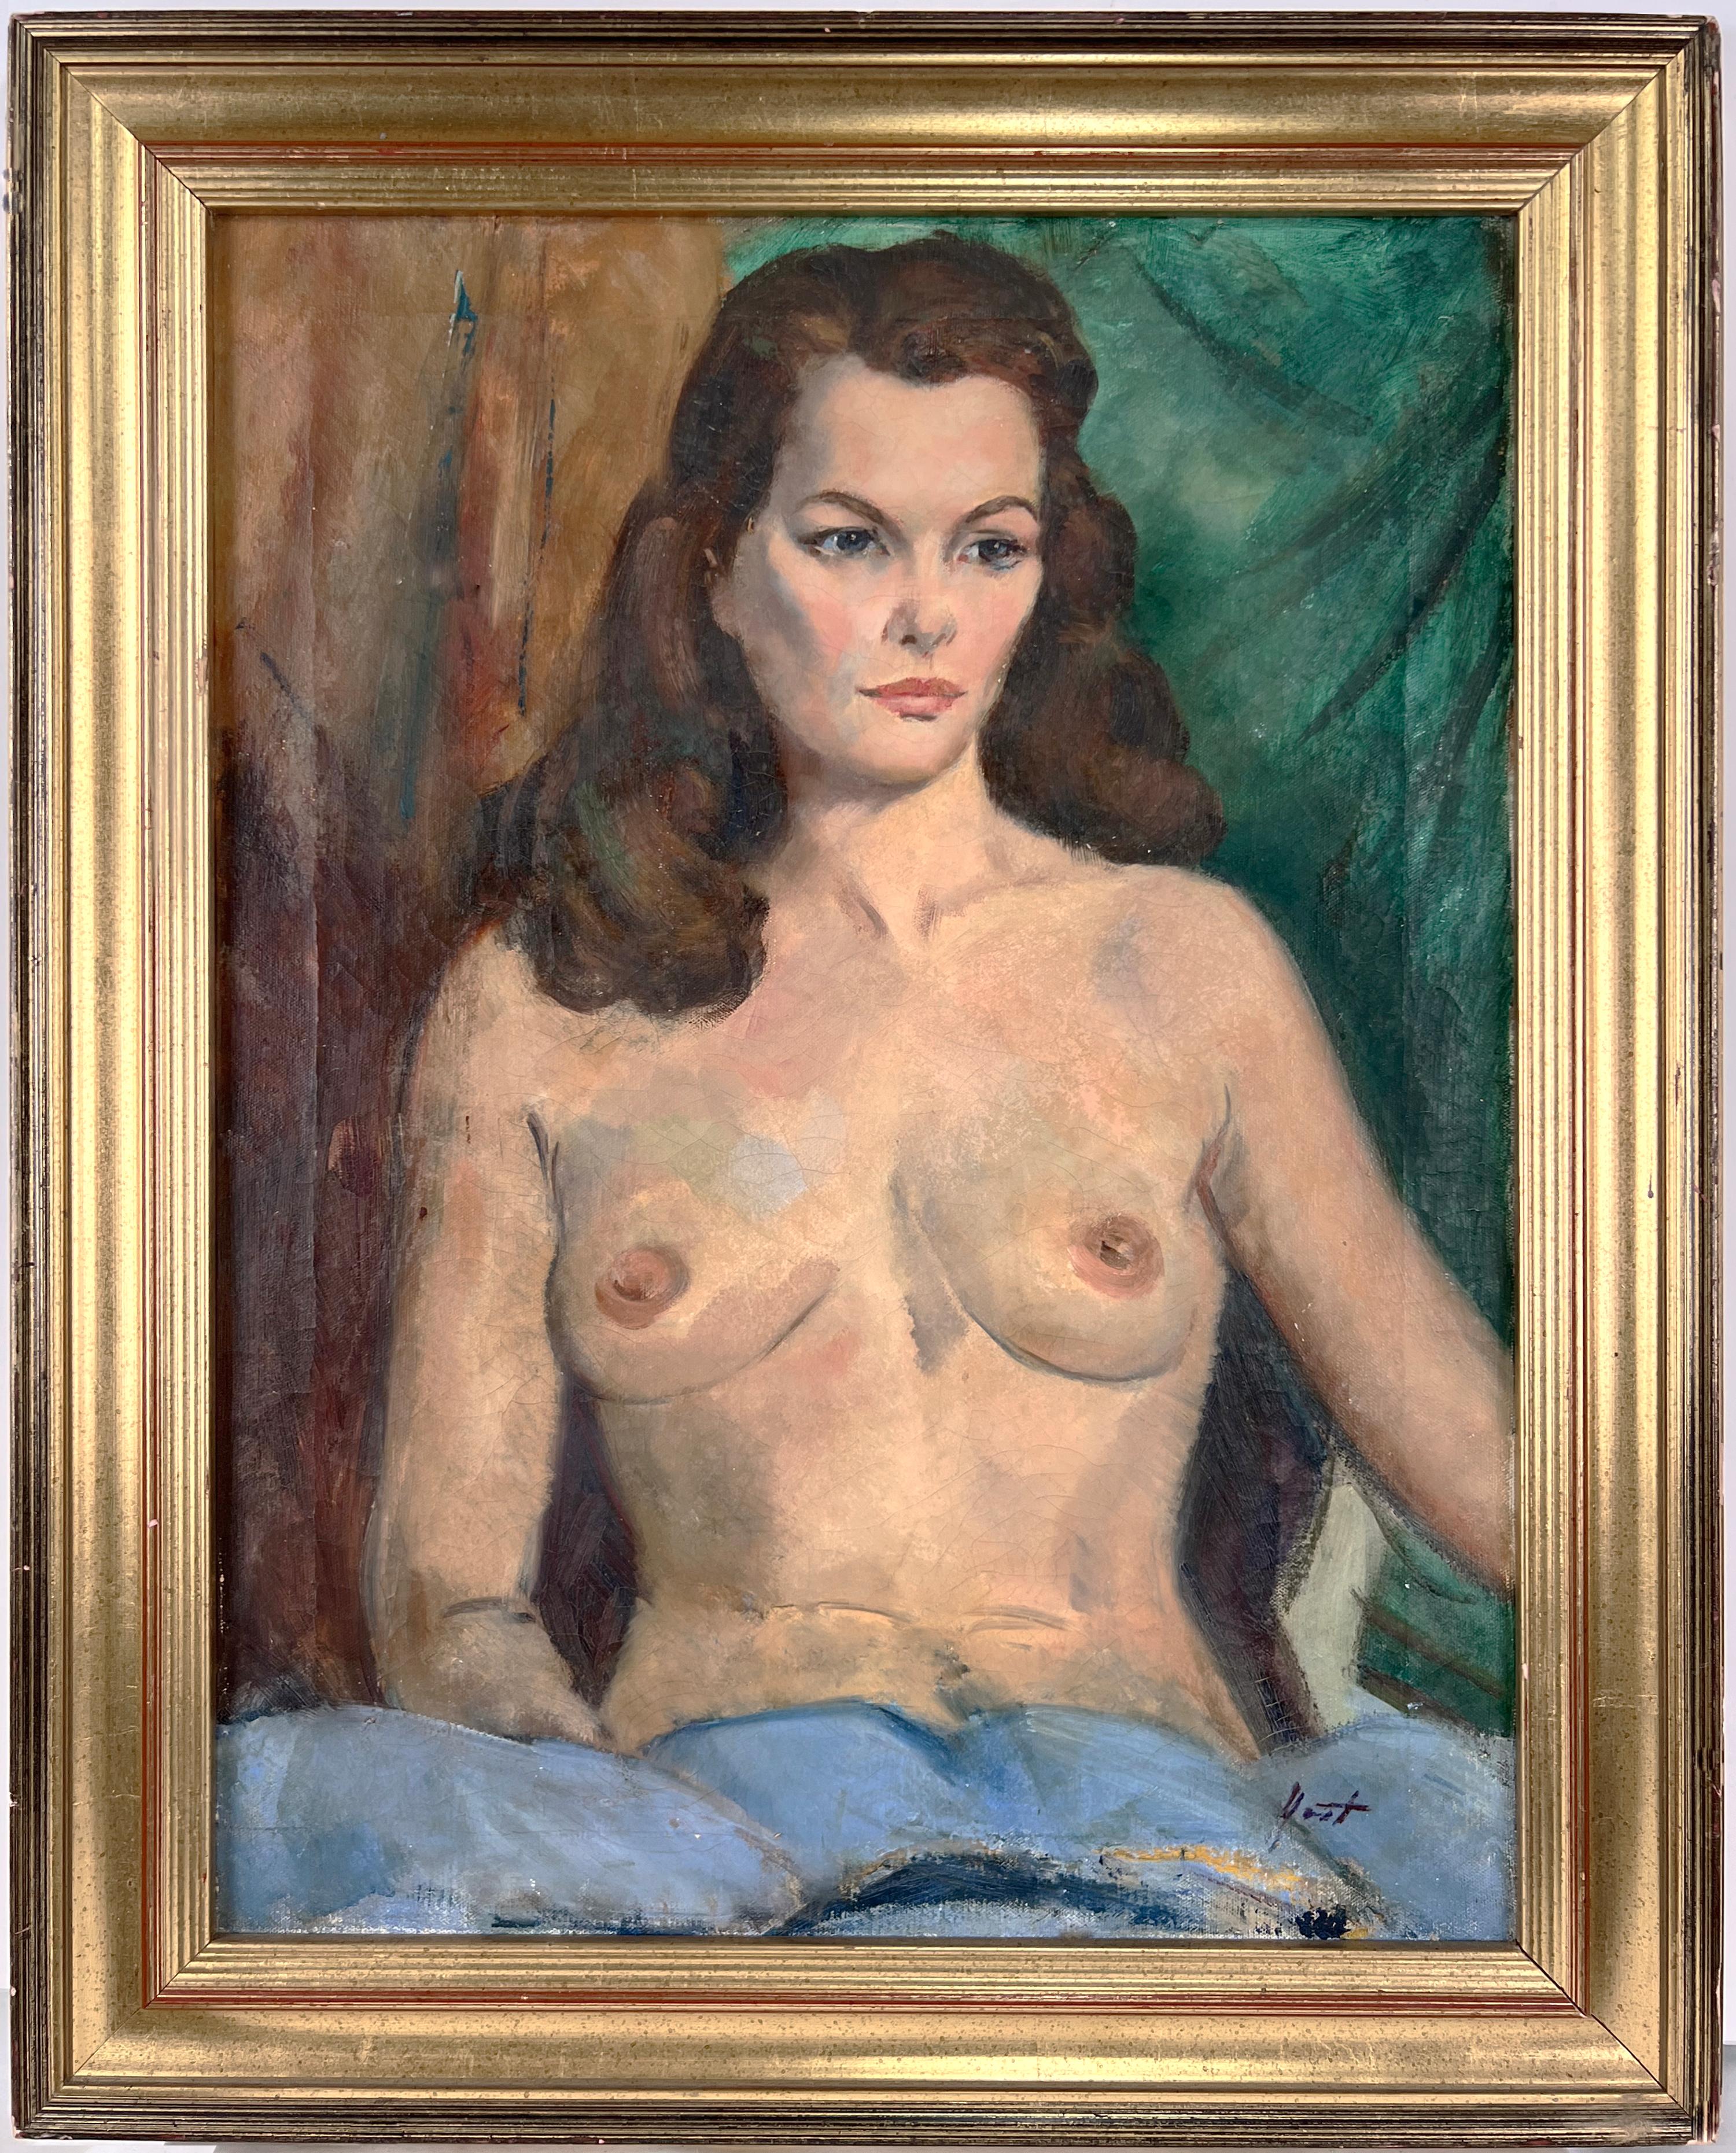 Seated Nude Woman American Impressionist School 1940s by Fred Yost 